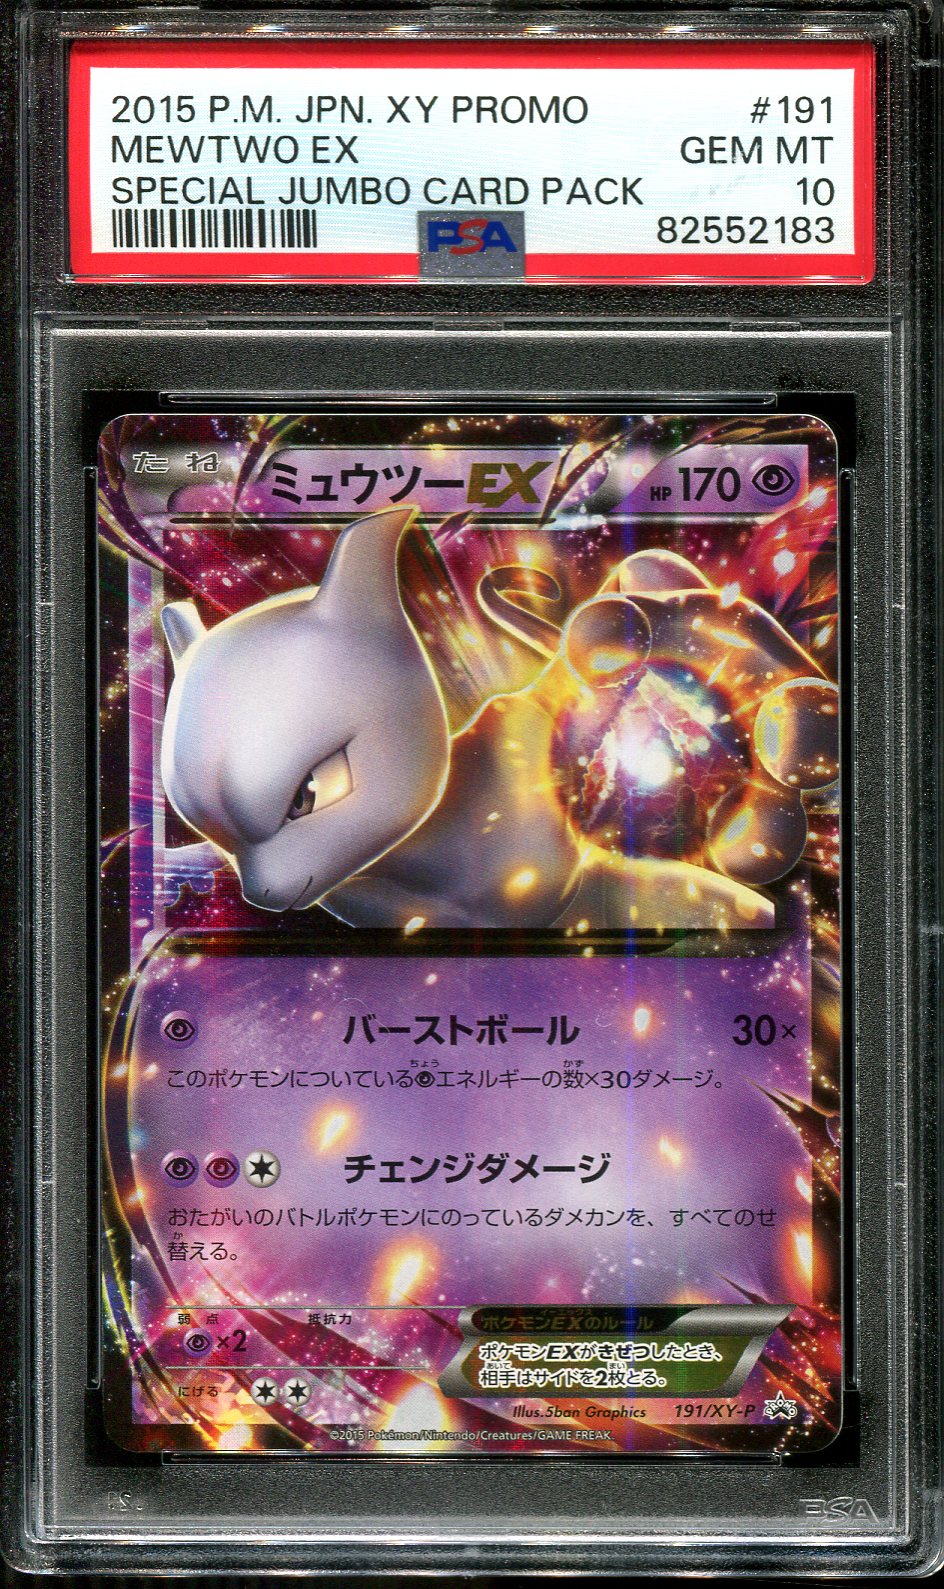 PSA 10 Mewtwo LV.X Holo Collection pack Promo Ptm Japanese Pokemon Card